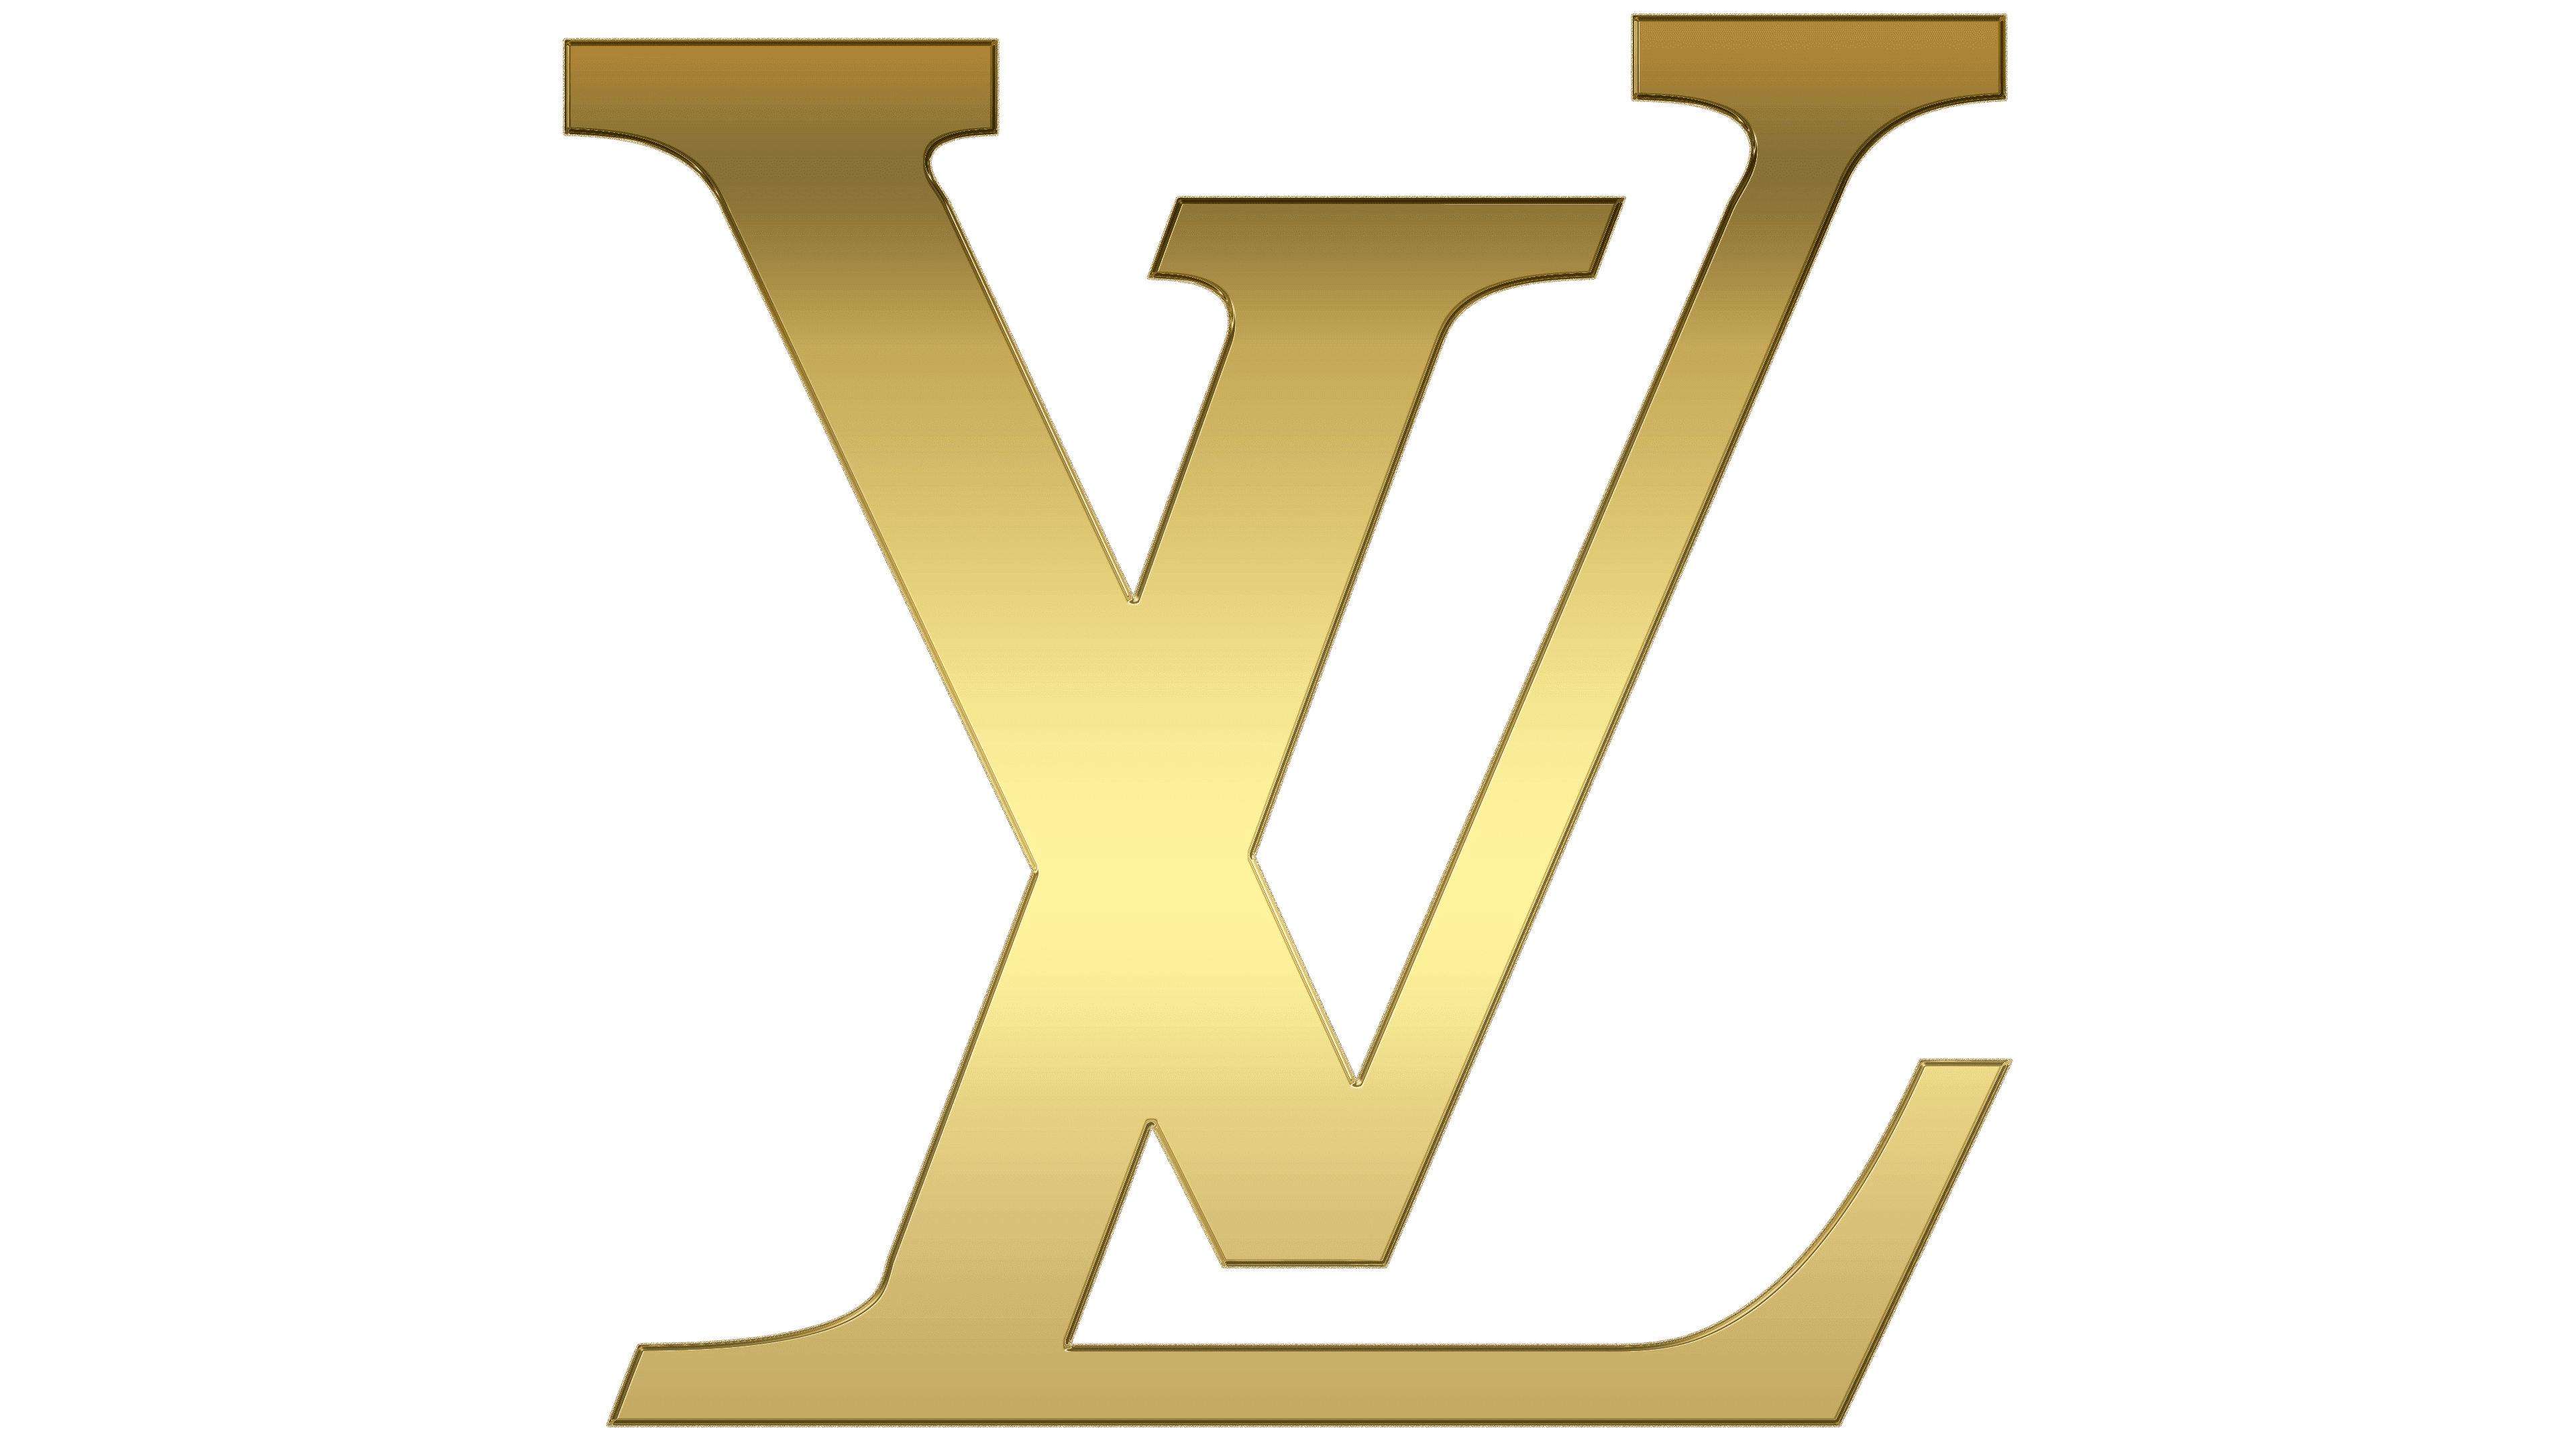 Louis Vuitton Logo | The most famous brands and company logos in the world